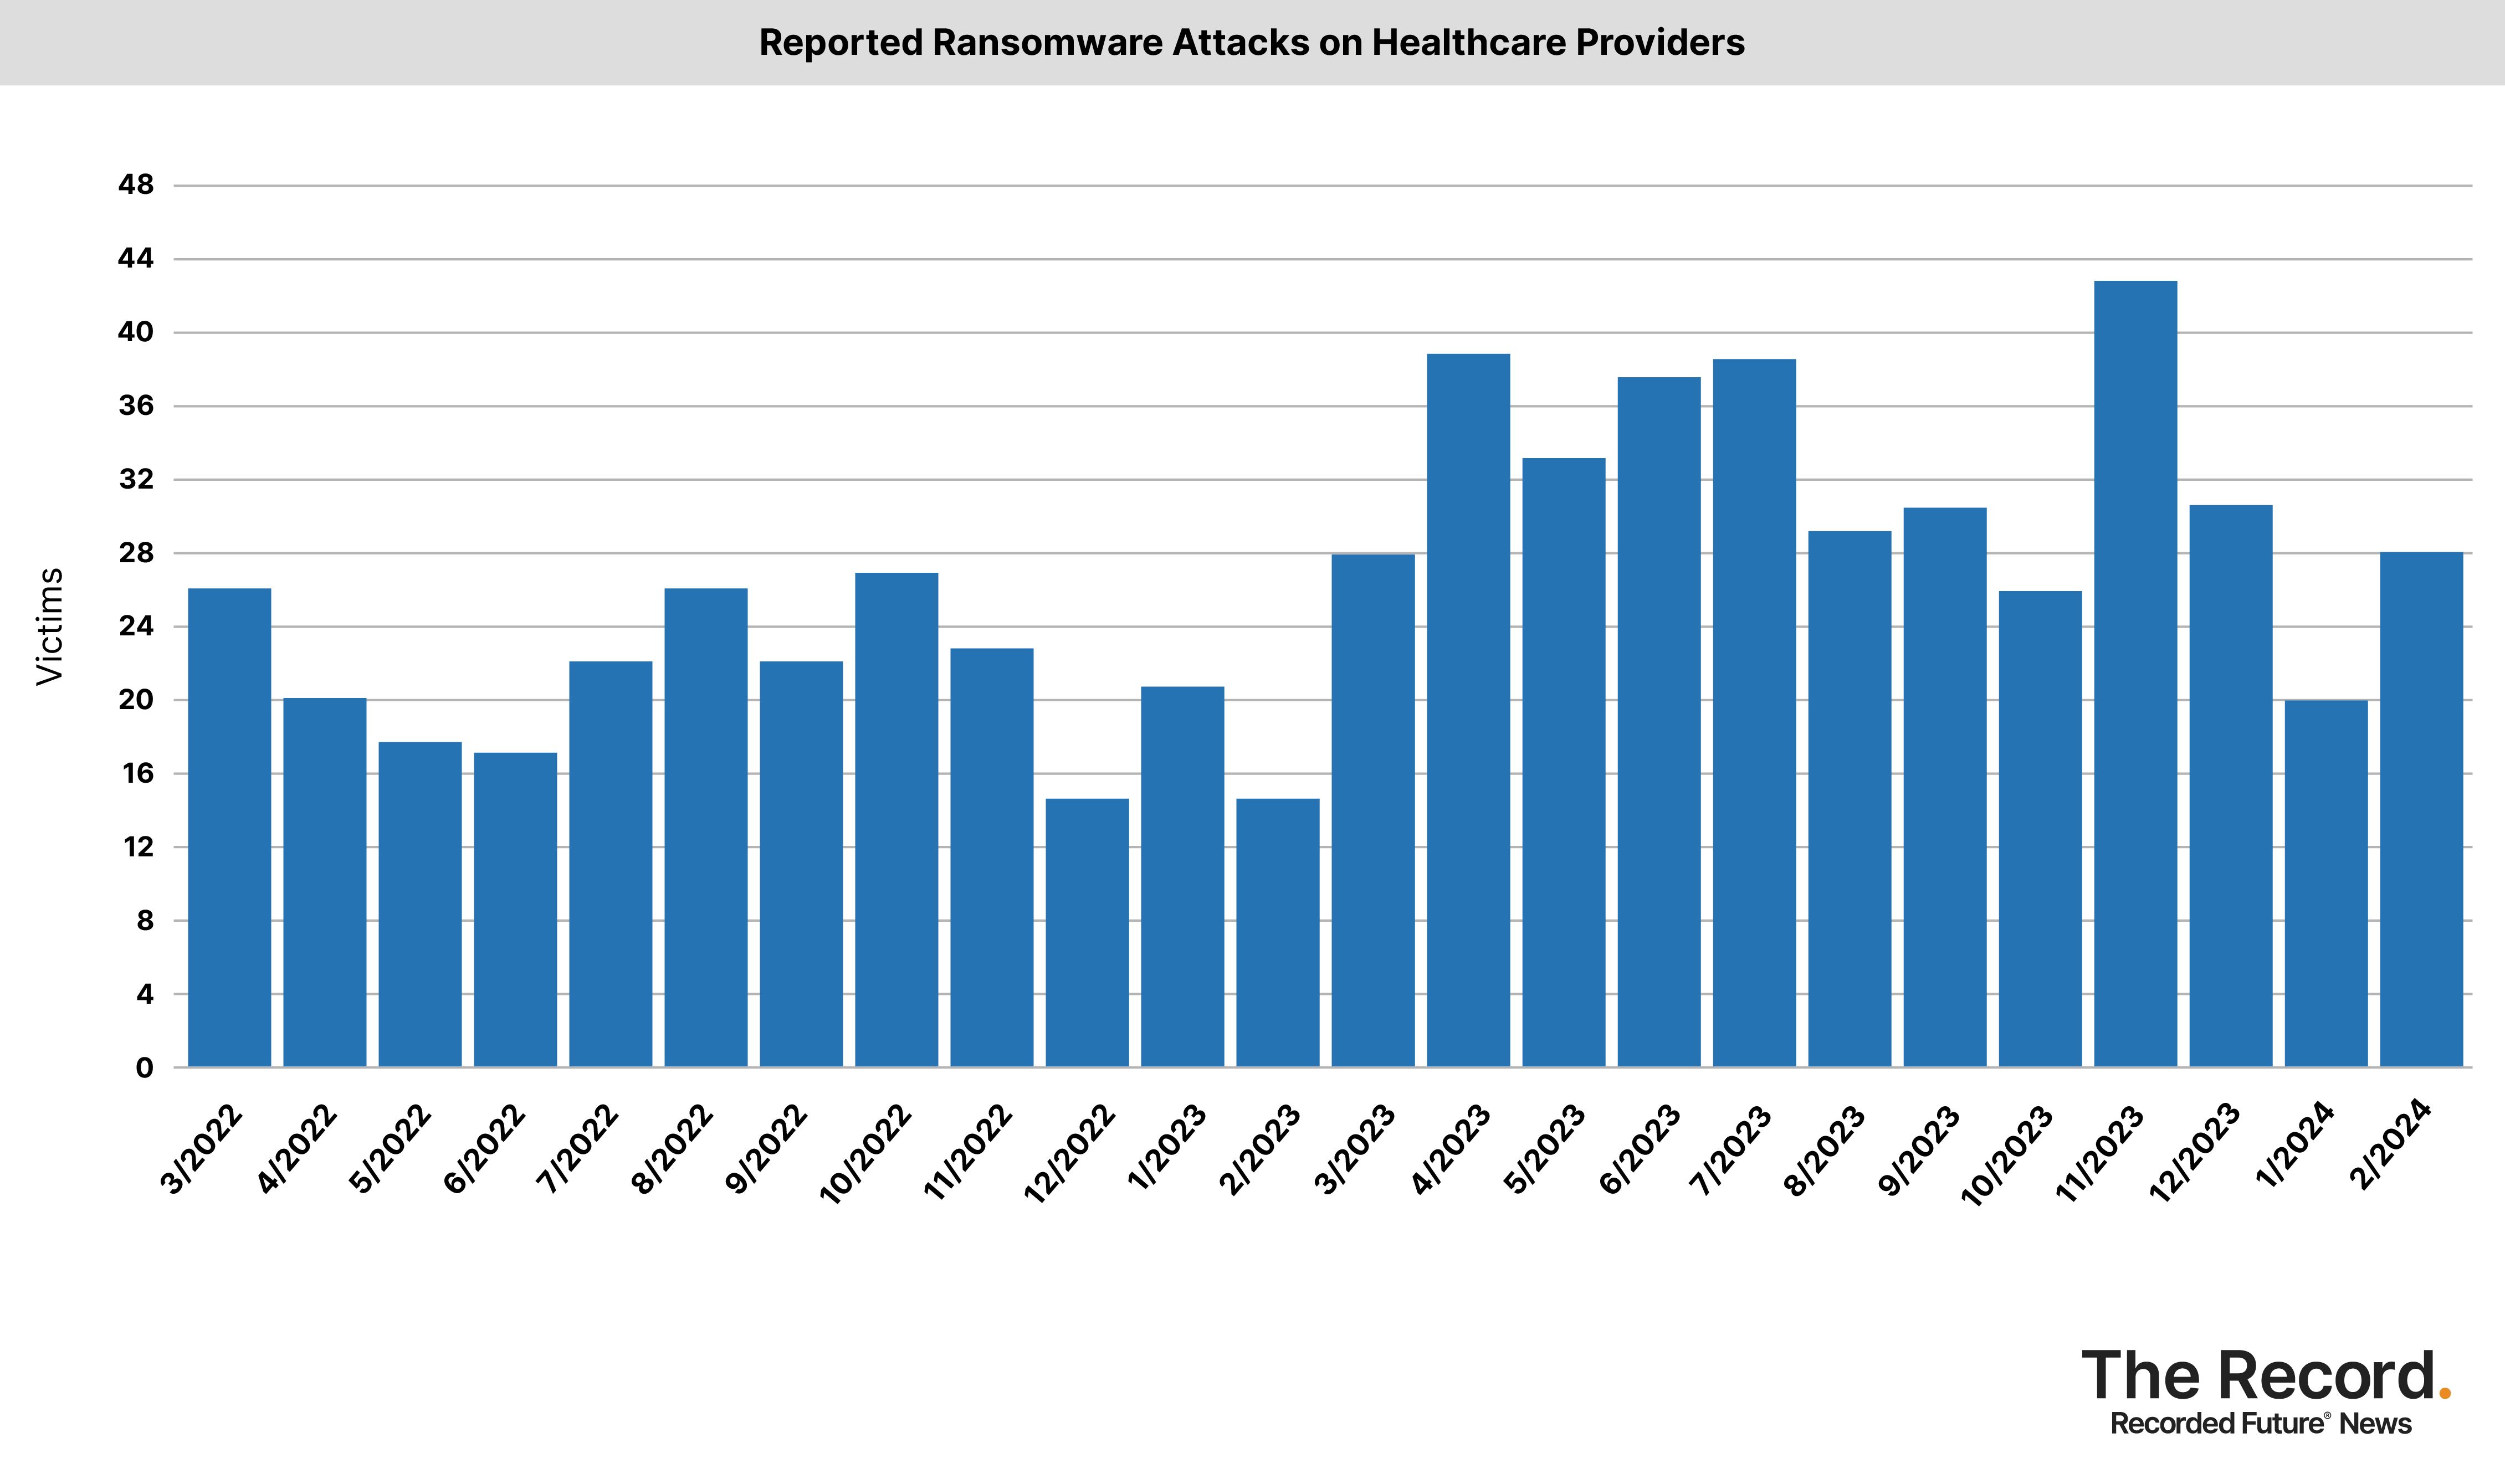 2024_0308 - Ransomware Tracker_Reported Ransomware Attacks on Healthcare Providers.jpg